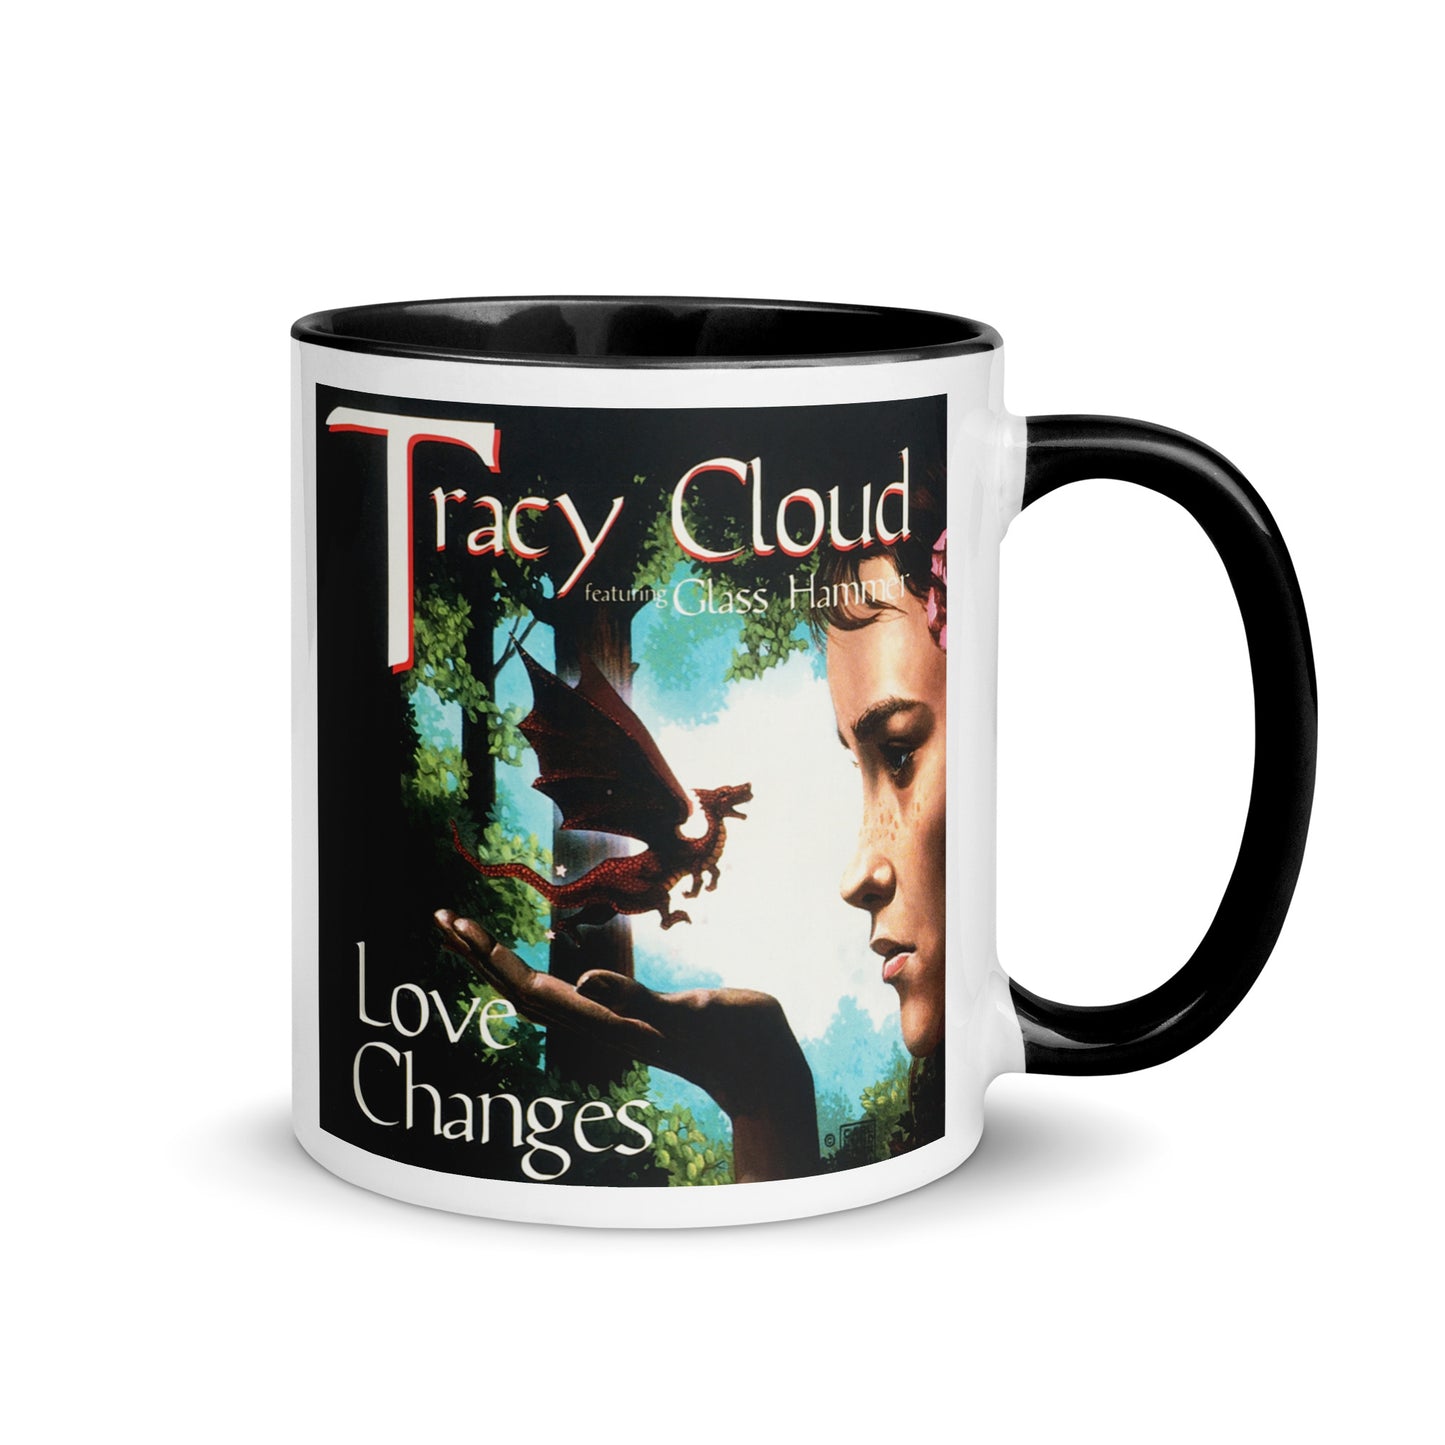 Tracy Cloud - Love Changes Mug With Color Inside